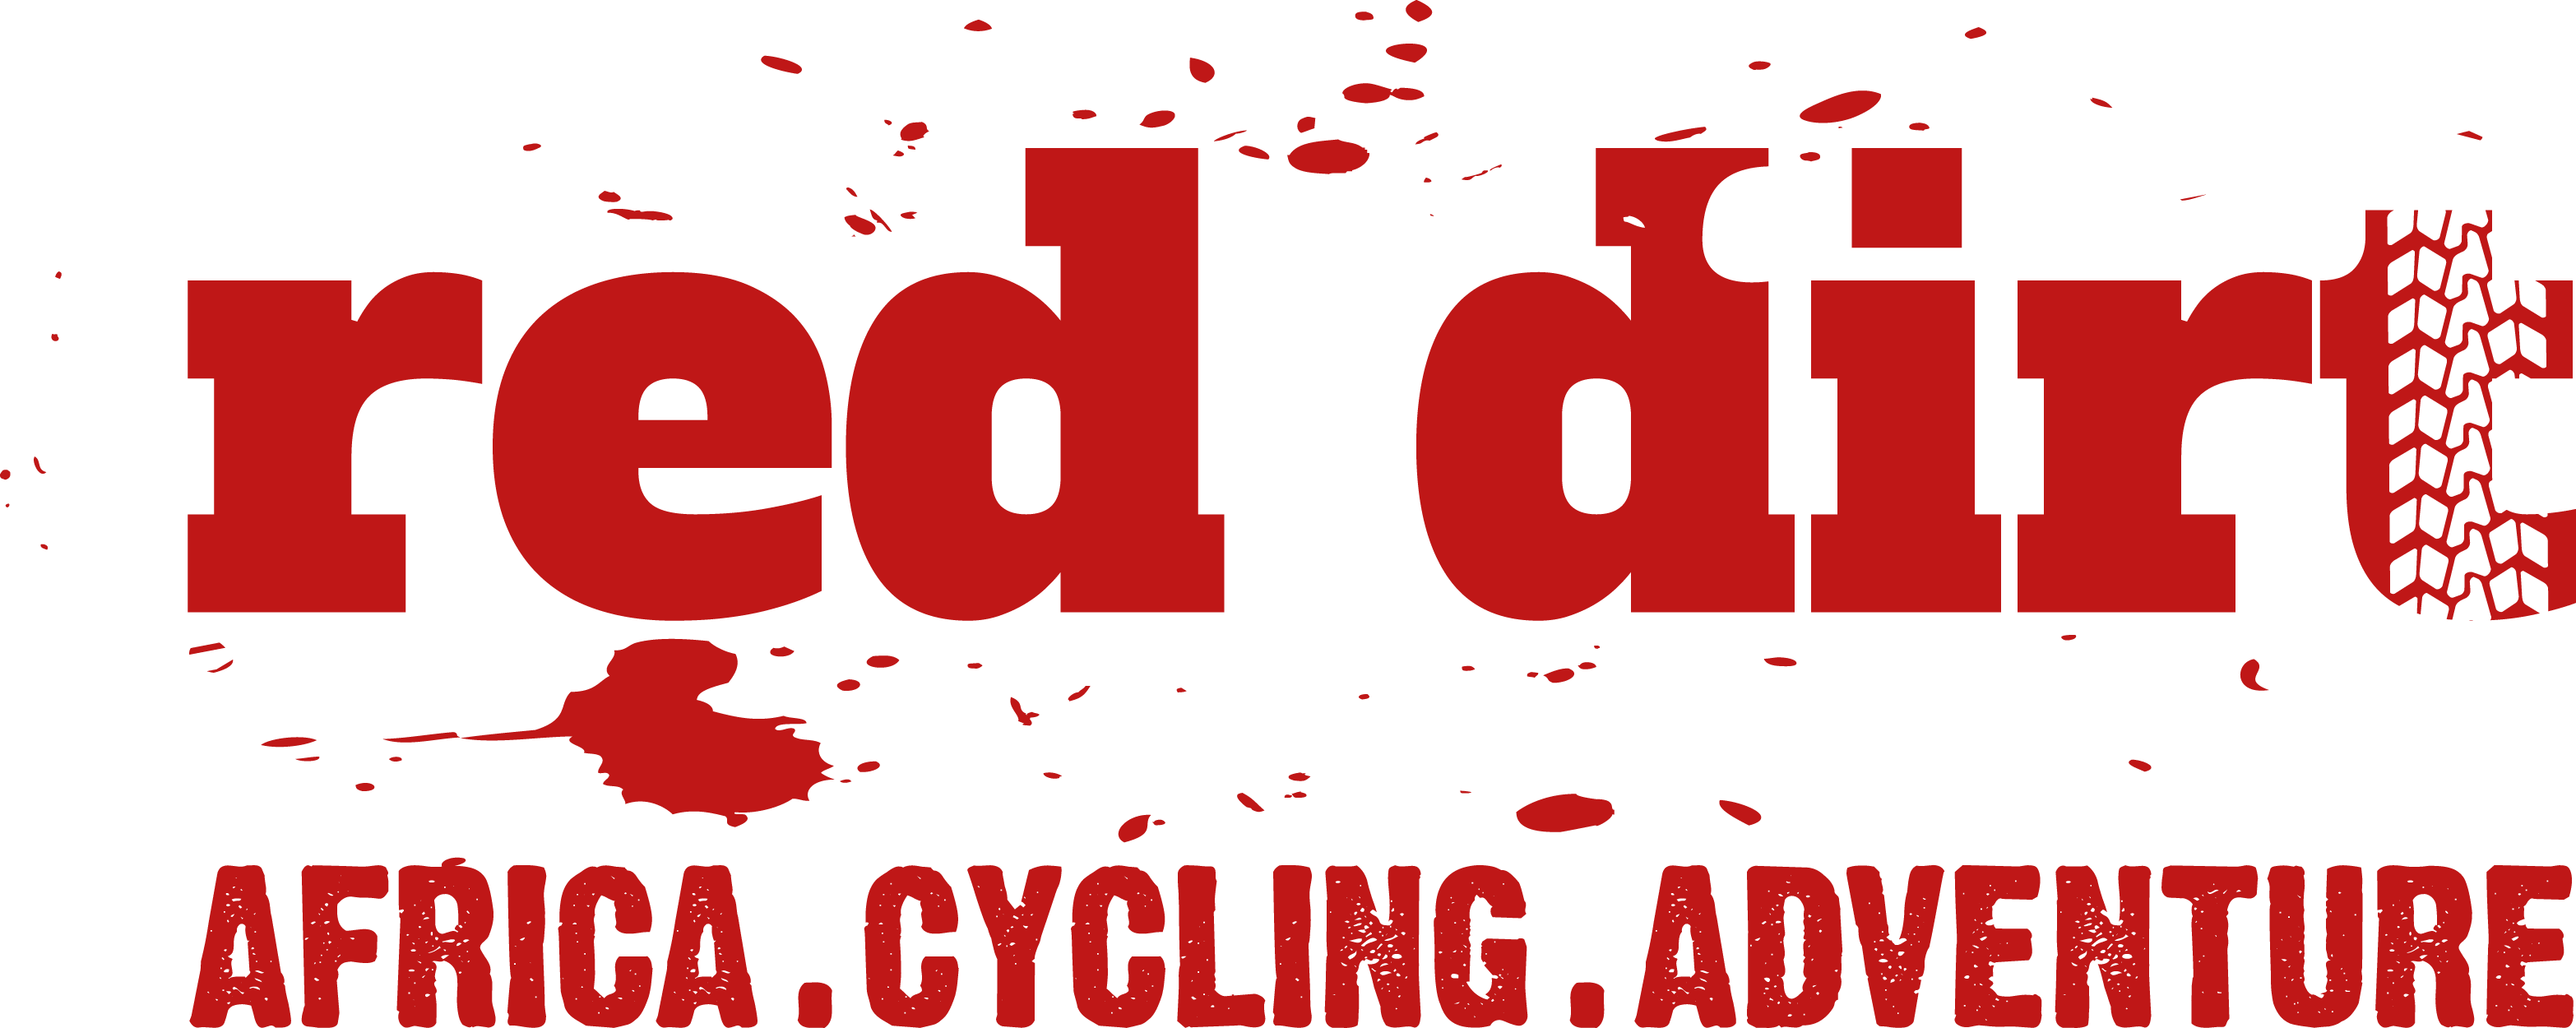 NEW logo and slogan Red Dirt - red